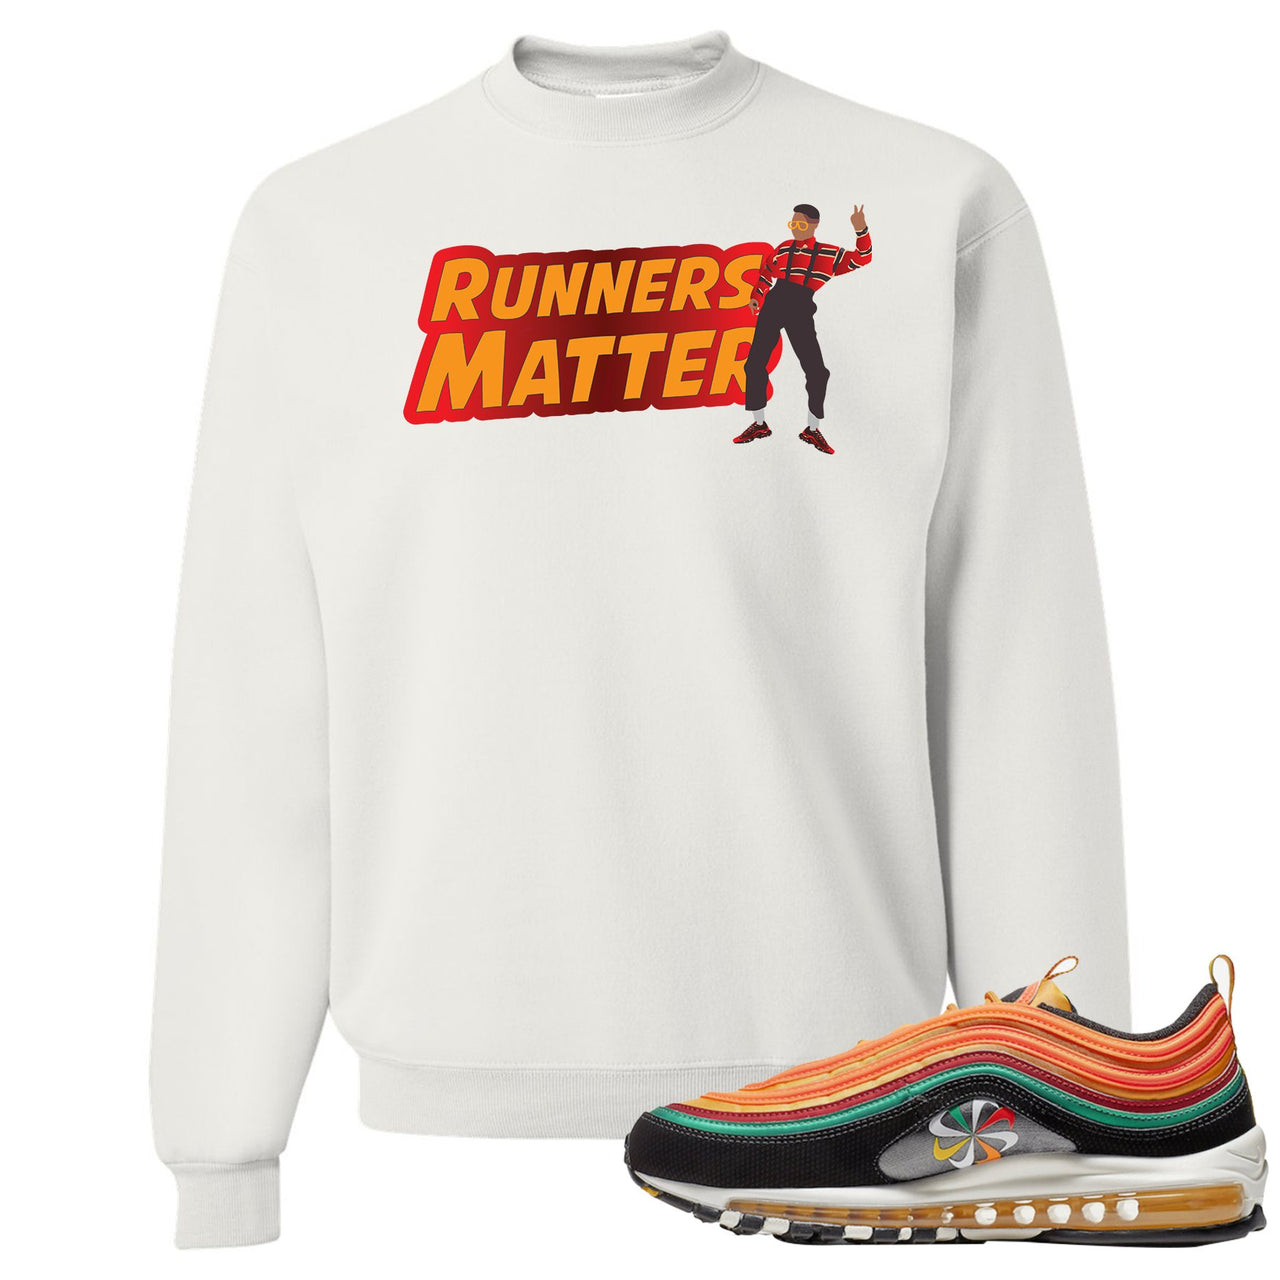 Printed on the front of the Air Max 97 Sunburst white sneaker matching crewneck sweatshirt is the Runners Matter logo